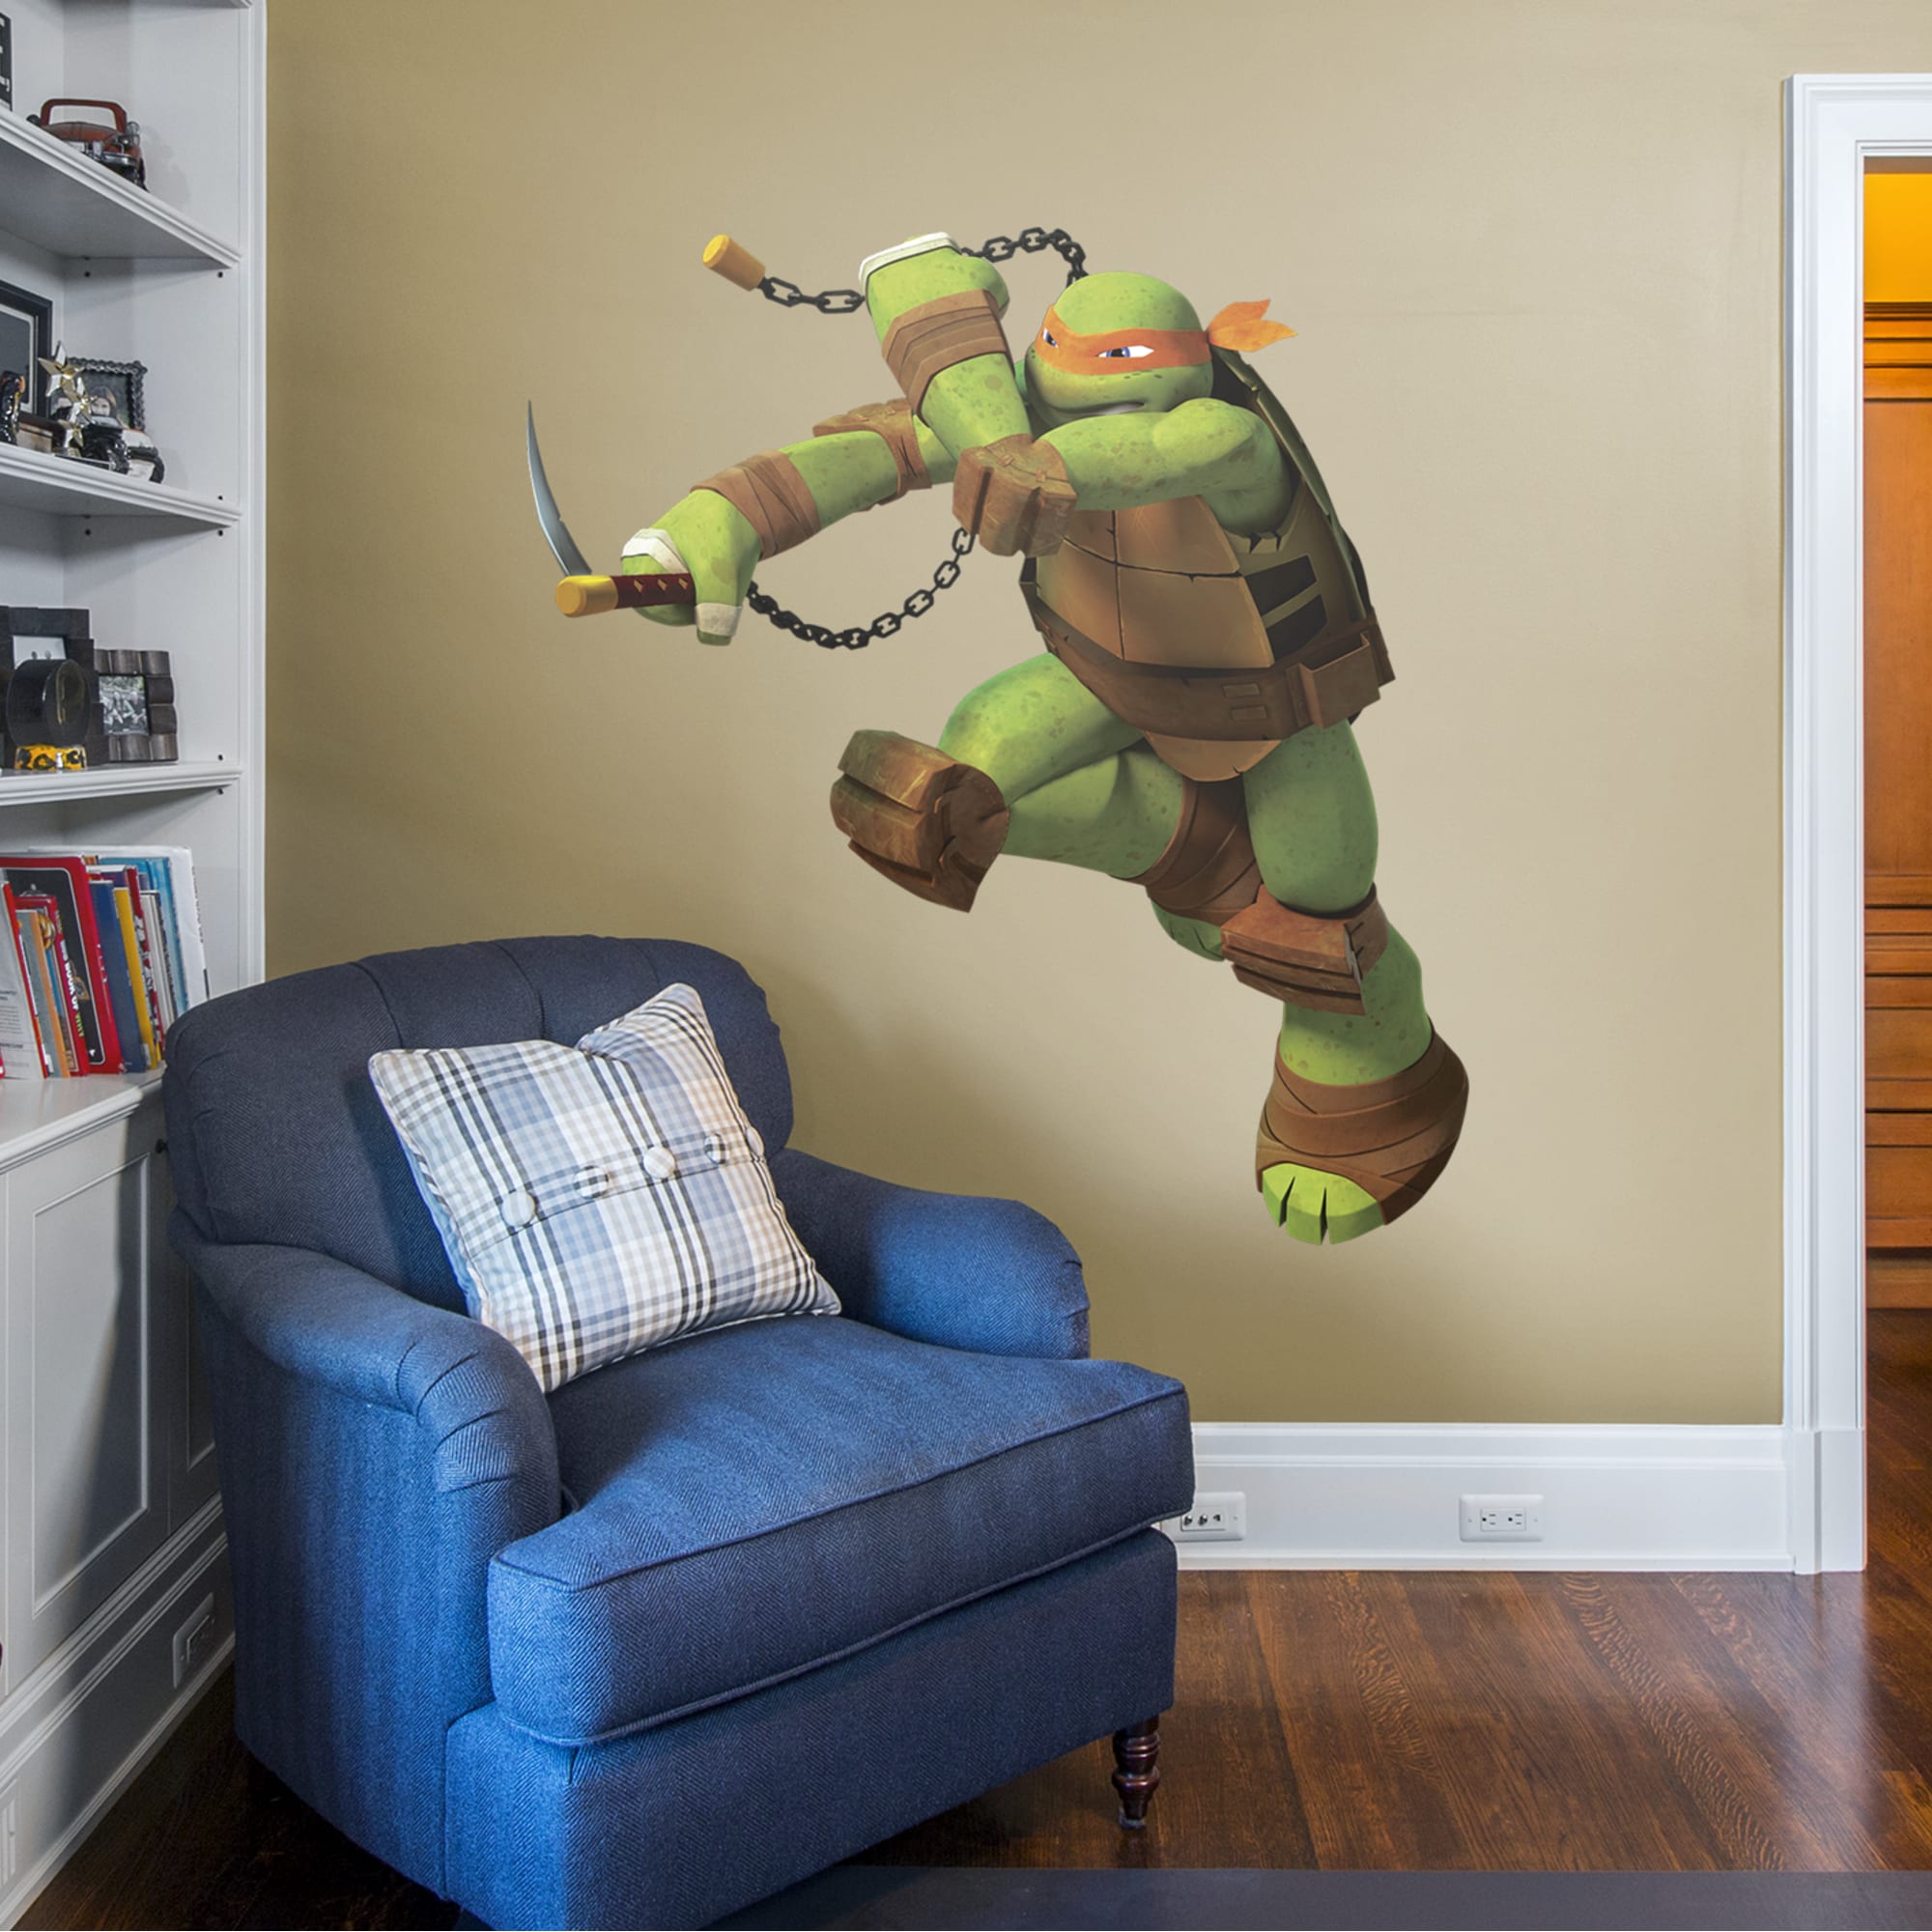 Michelangelo - Officially Licensed Removable Wall Decals 68.0"W x 56.0"H by Fathead | Vinyl